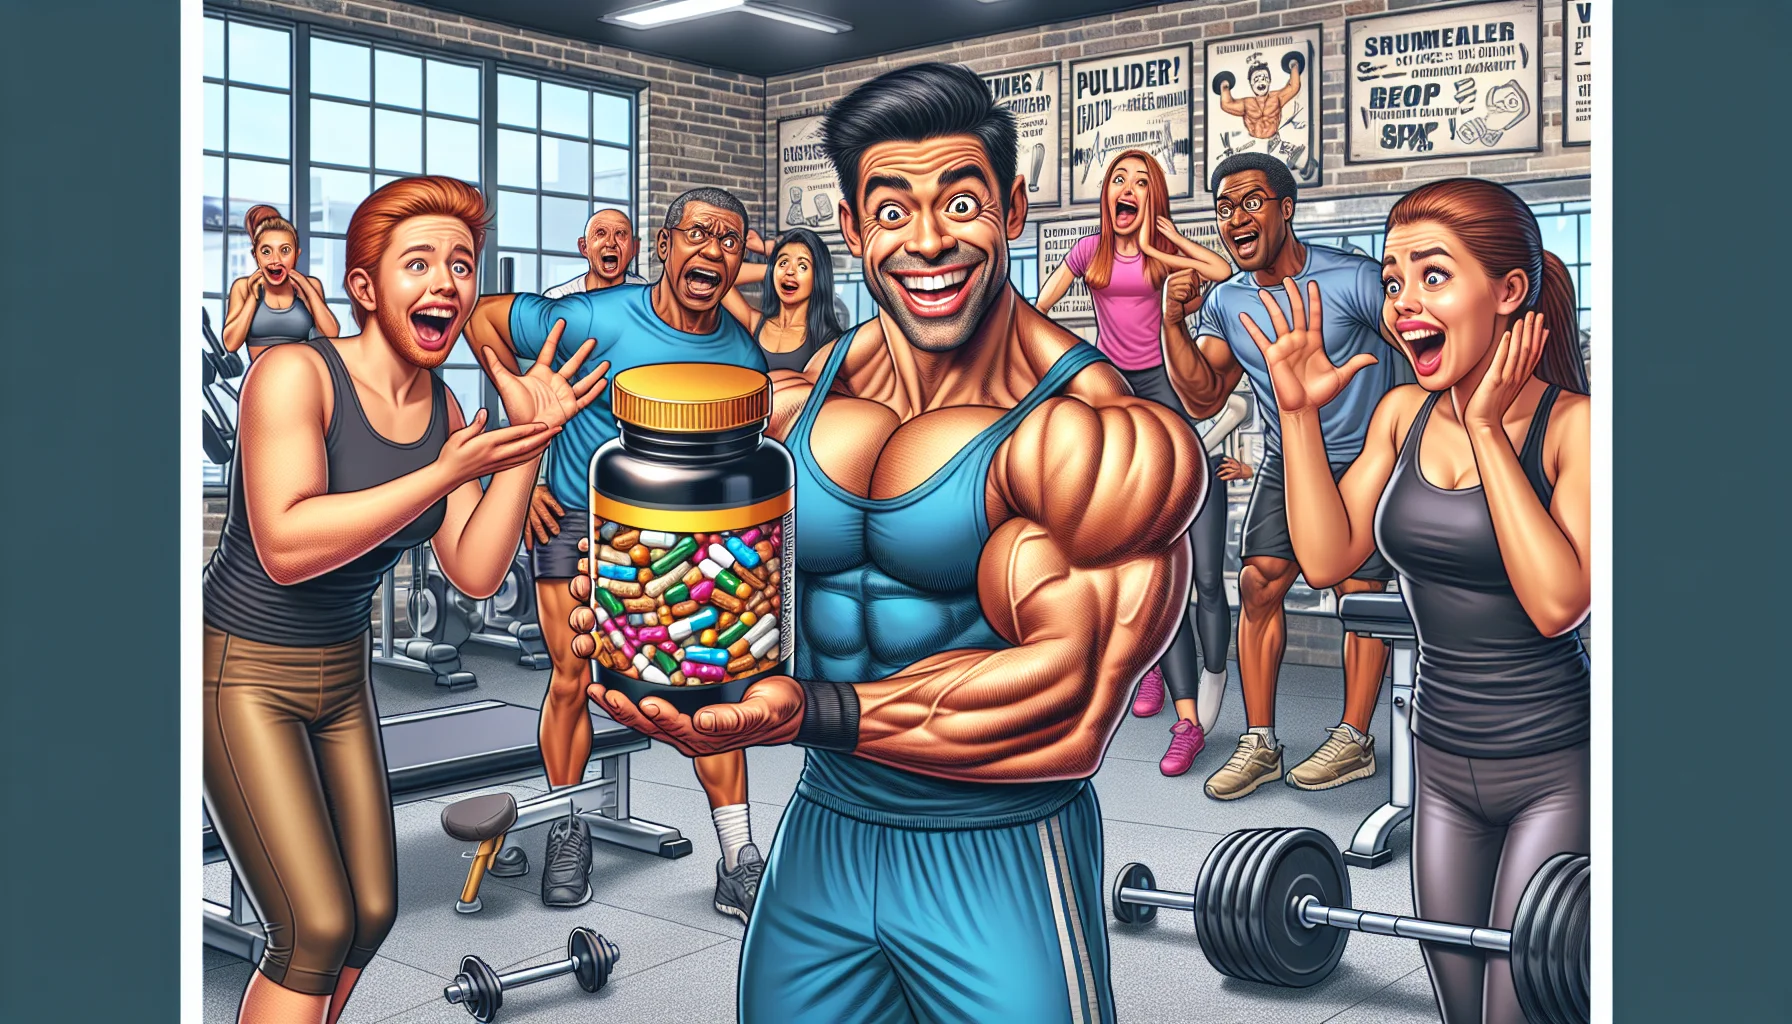 Imagine an amusing scenario where caricatures are stage. A comedic, self-aware parody of an especially enthusiastic South Asian male trainer promoting various fitness supplements. His expression is joyous, while he holds a ridiculously oversized pill, signifying its effectiveness. The setting is a well-equipped gym with diverse workout machines. The onlookers, a Caucasian woman and a Black man, display comically surprised expressions at the grandeur of the presented supplement. In the background, humorous hints to exercise, like dumbbells doing push-ups, or barbells curling smaller barbells, to encapsulate the atmosphere of a gym where everyone, and everything, is dedicated to fitness. 